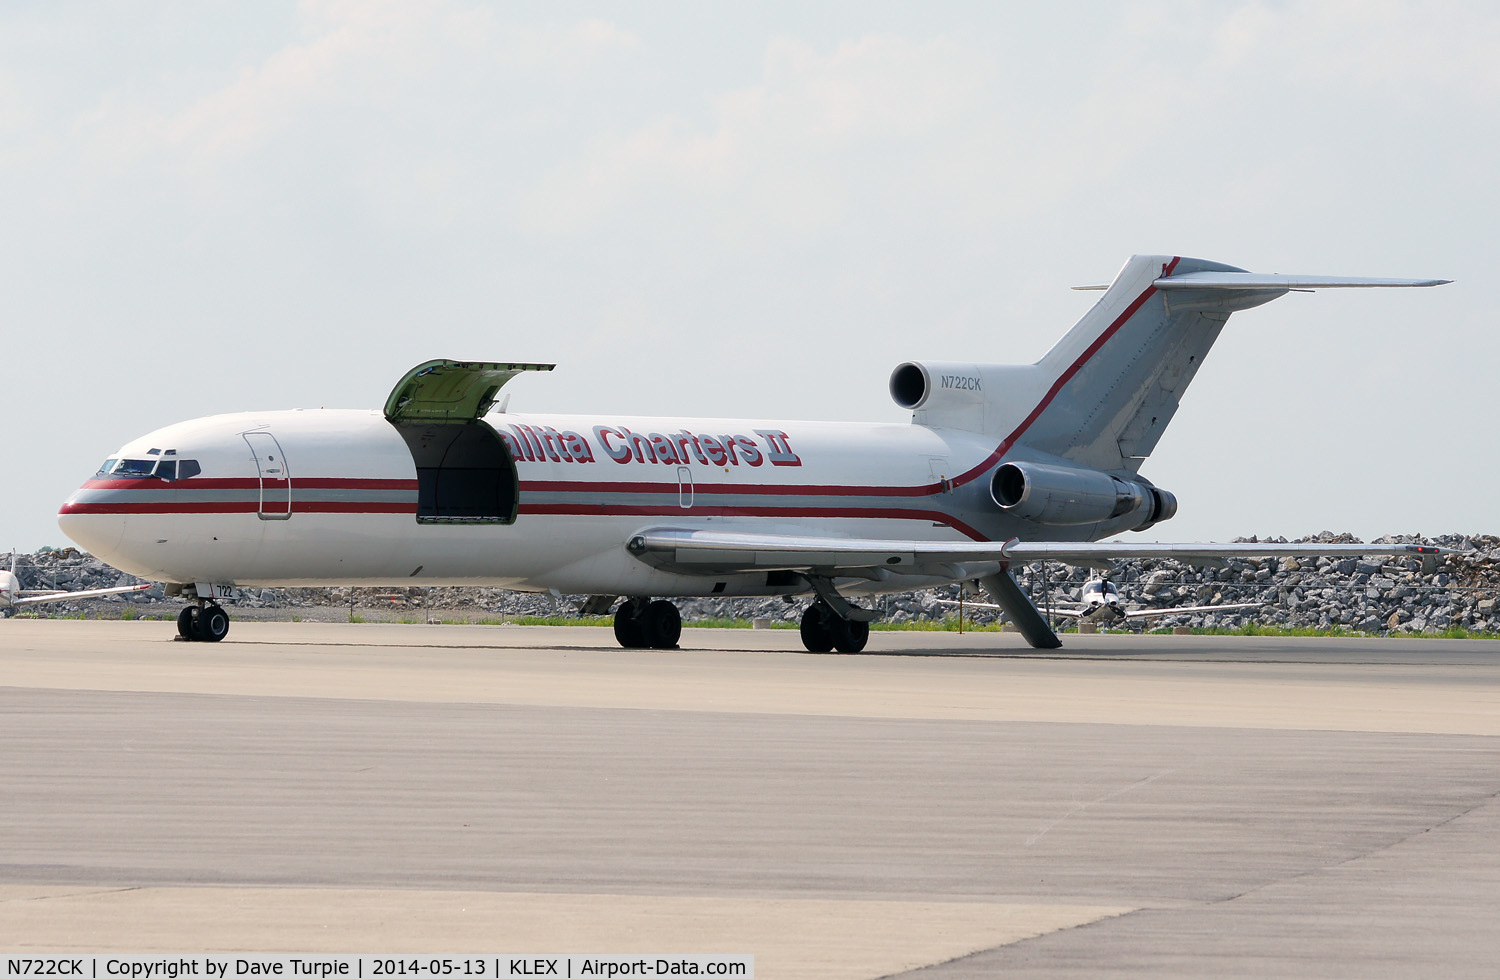 N722CK, 1974 Boeing 727-2H3 C/N 20948, It's used occasionally to transport high value horses.